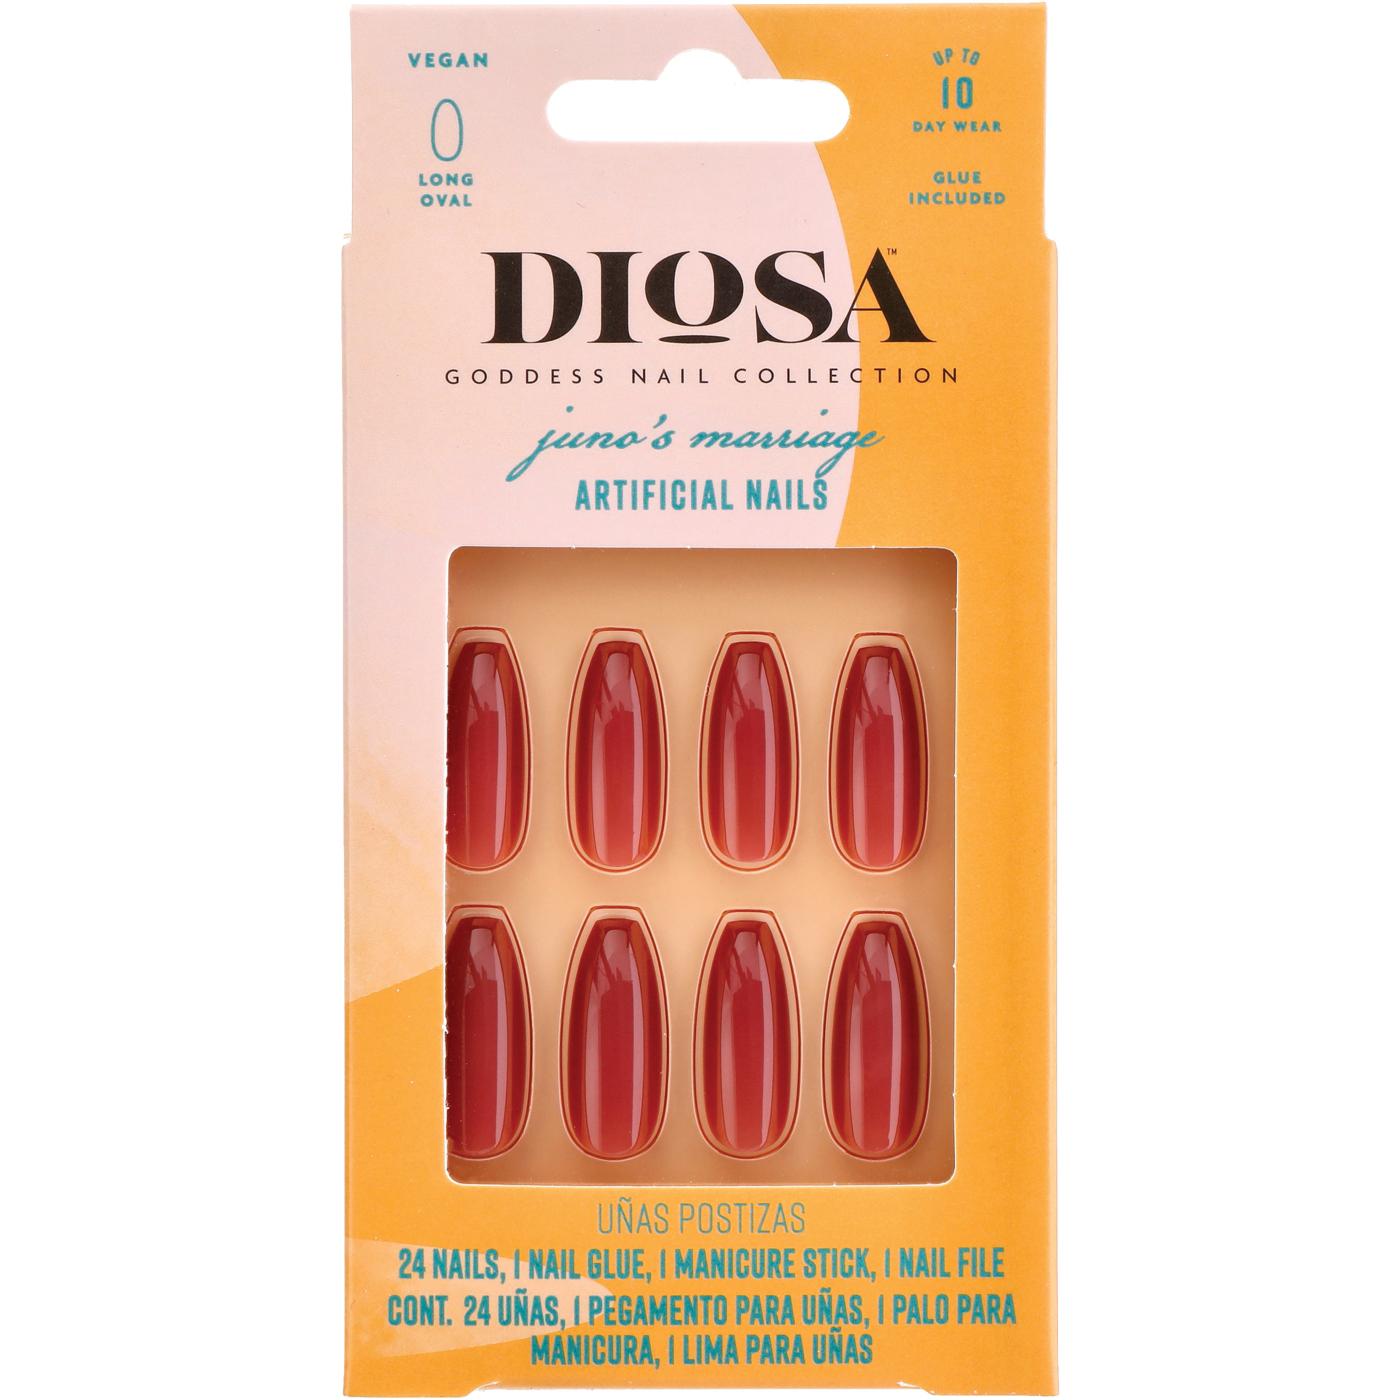 Diosa Juno's Marriage Artificial Nails - Dusty Rose; image 1 of 4